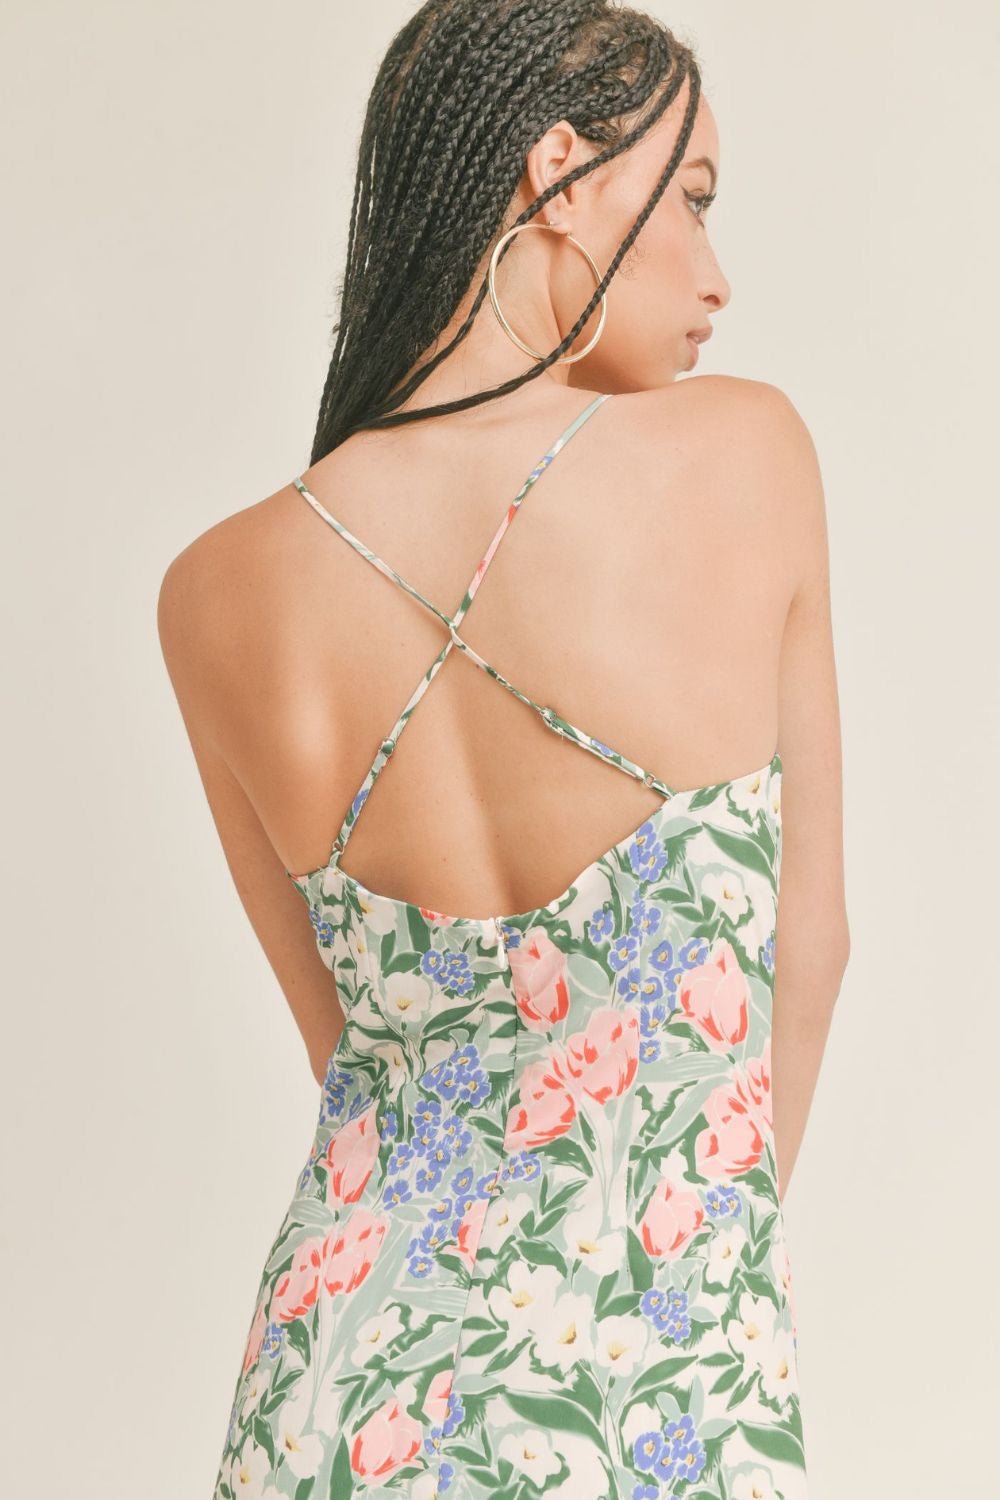 Sage The Label | Romantic Floral Midi Dress - Women&#39;s Dresses - Blooming Daily